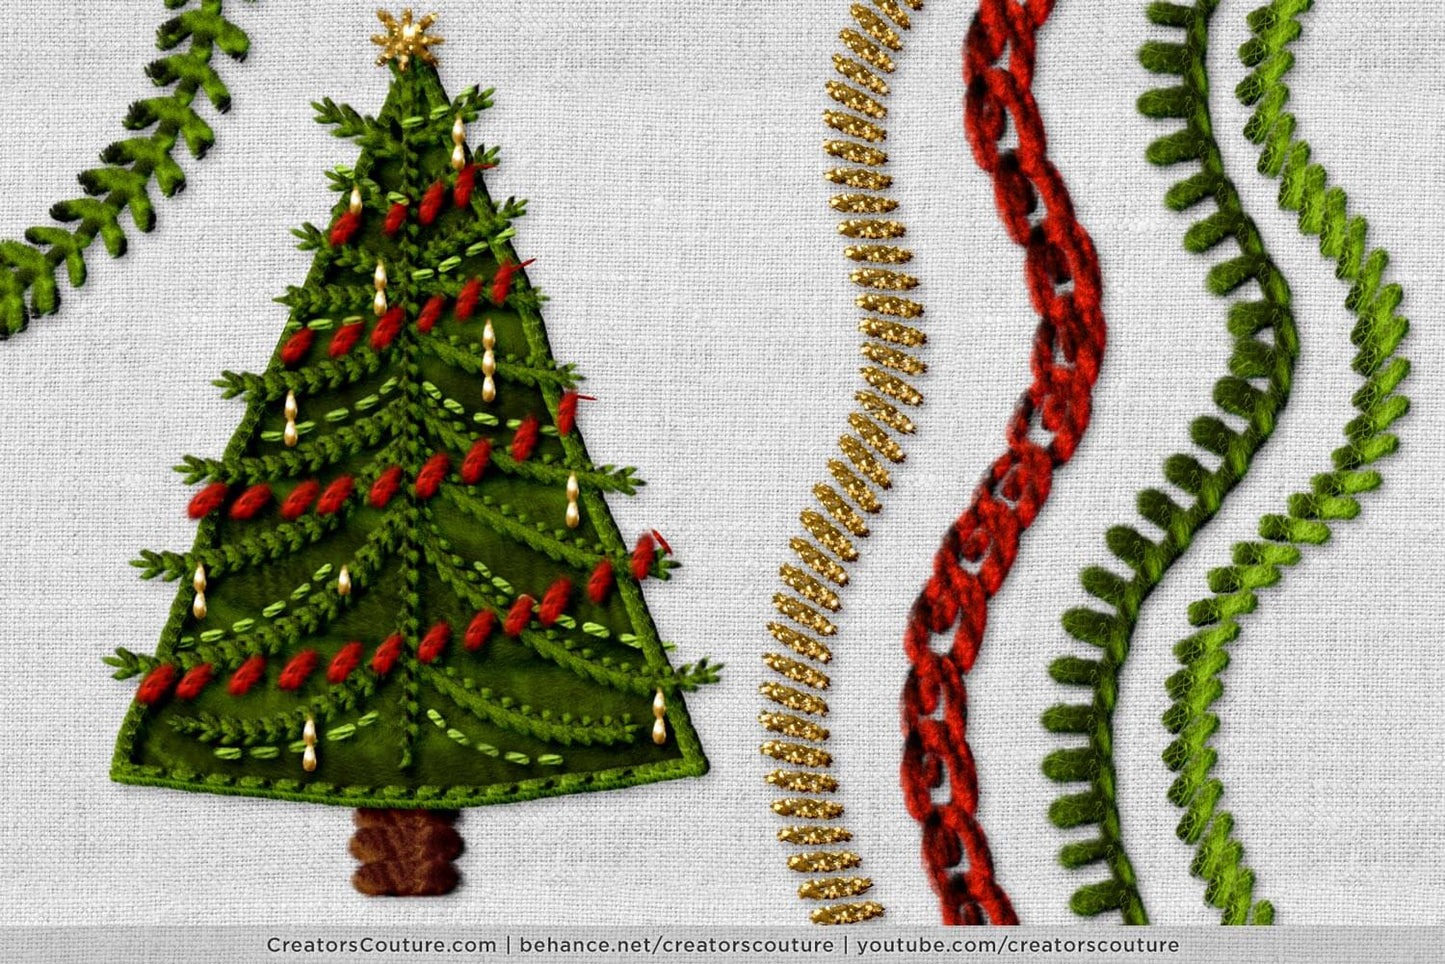 Christmas tree that looks embroidered but was created with Photoshop embroidery brushes